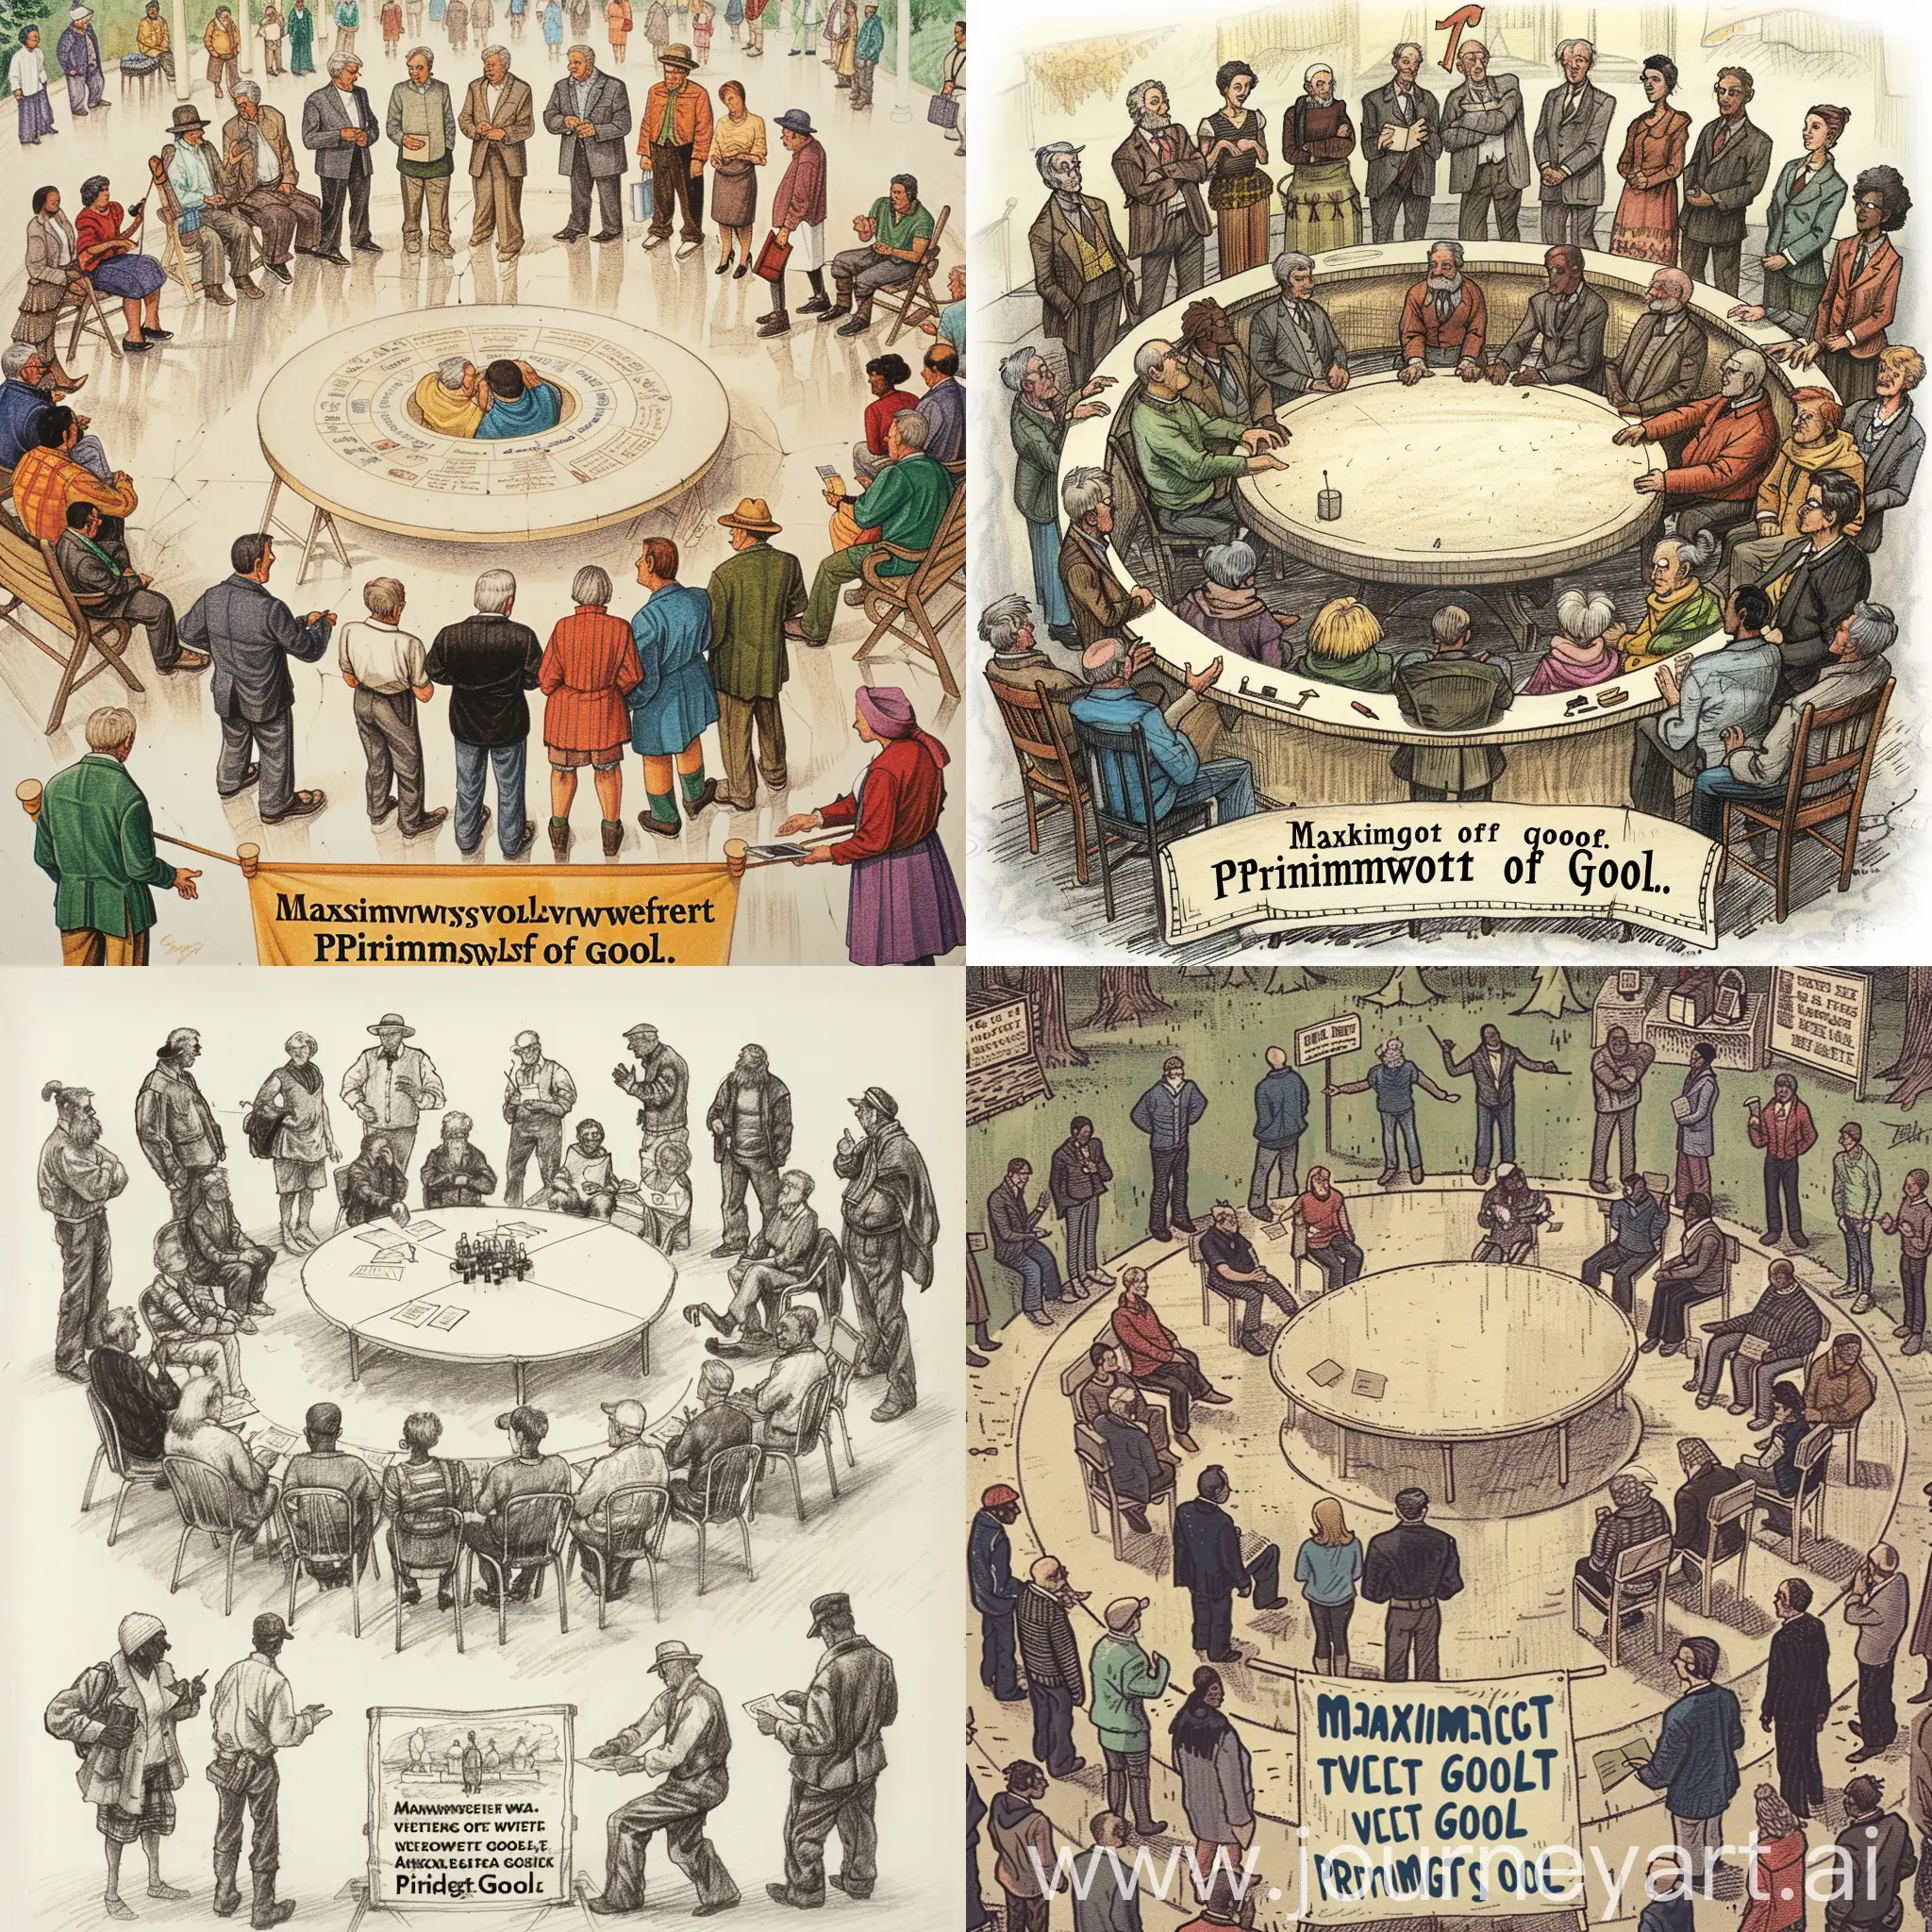  envision a scene where different people gather in a public space, such as a square or a meeting hall, to discuss and vote on an important decision for their community. People of various ages, races, and backgrounds could be depicted, all engaged in the decision-making process. At the center of the scene, you might imagine a large round table or a series of circular chairs, where people sit to discuss and deliberate. At the bottom of the scene, you could draw a sign or a flag that reads "Maximization of Good" or "Principle of Utility," to underscore the central theme of the discussion.